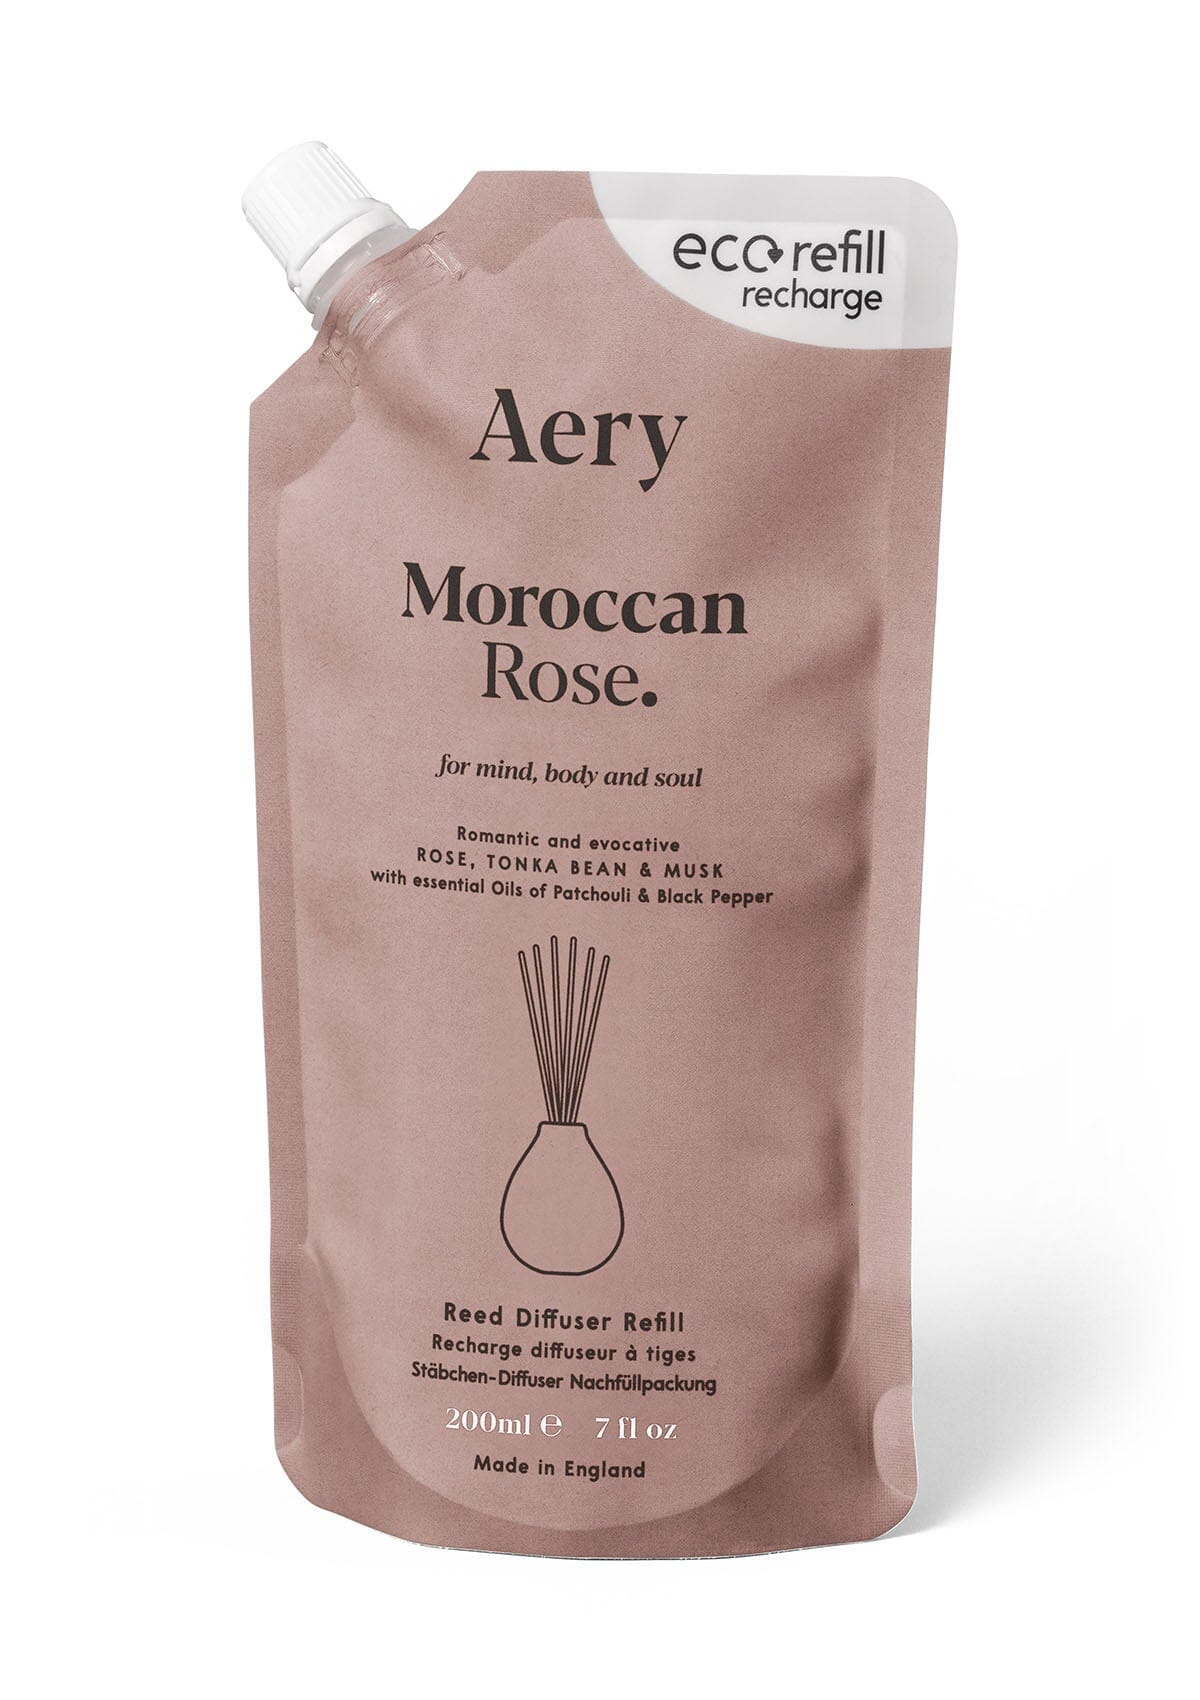 Moroccan Rose reed diffuser refill pouch by aery displayed on white background 